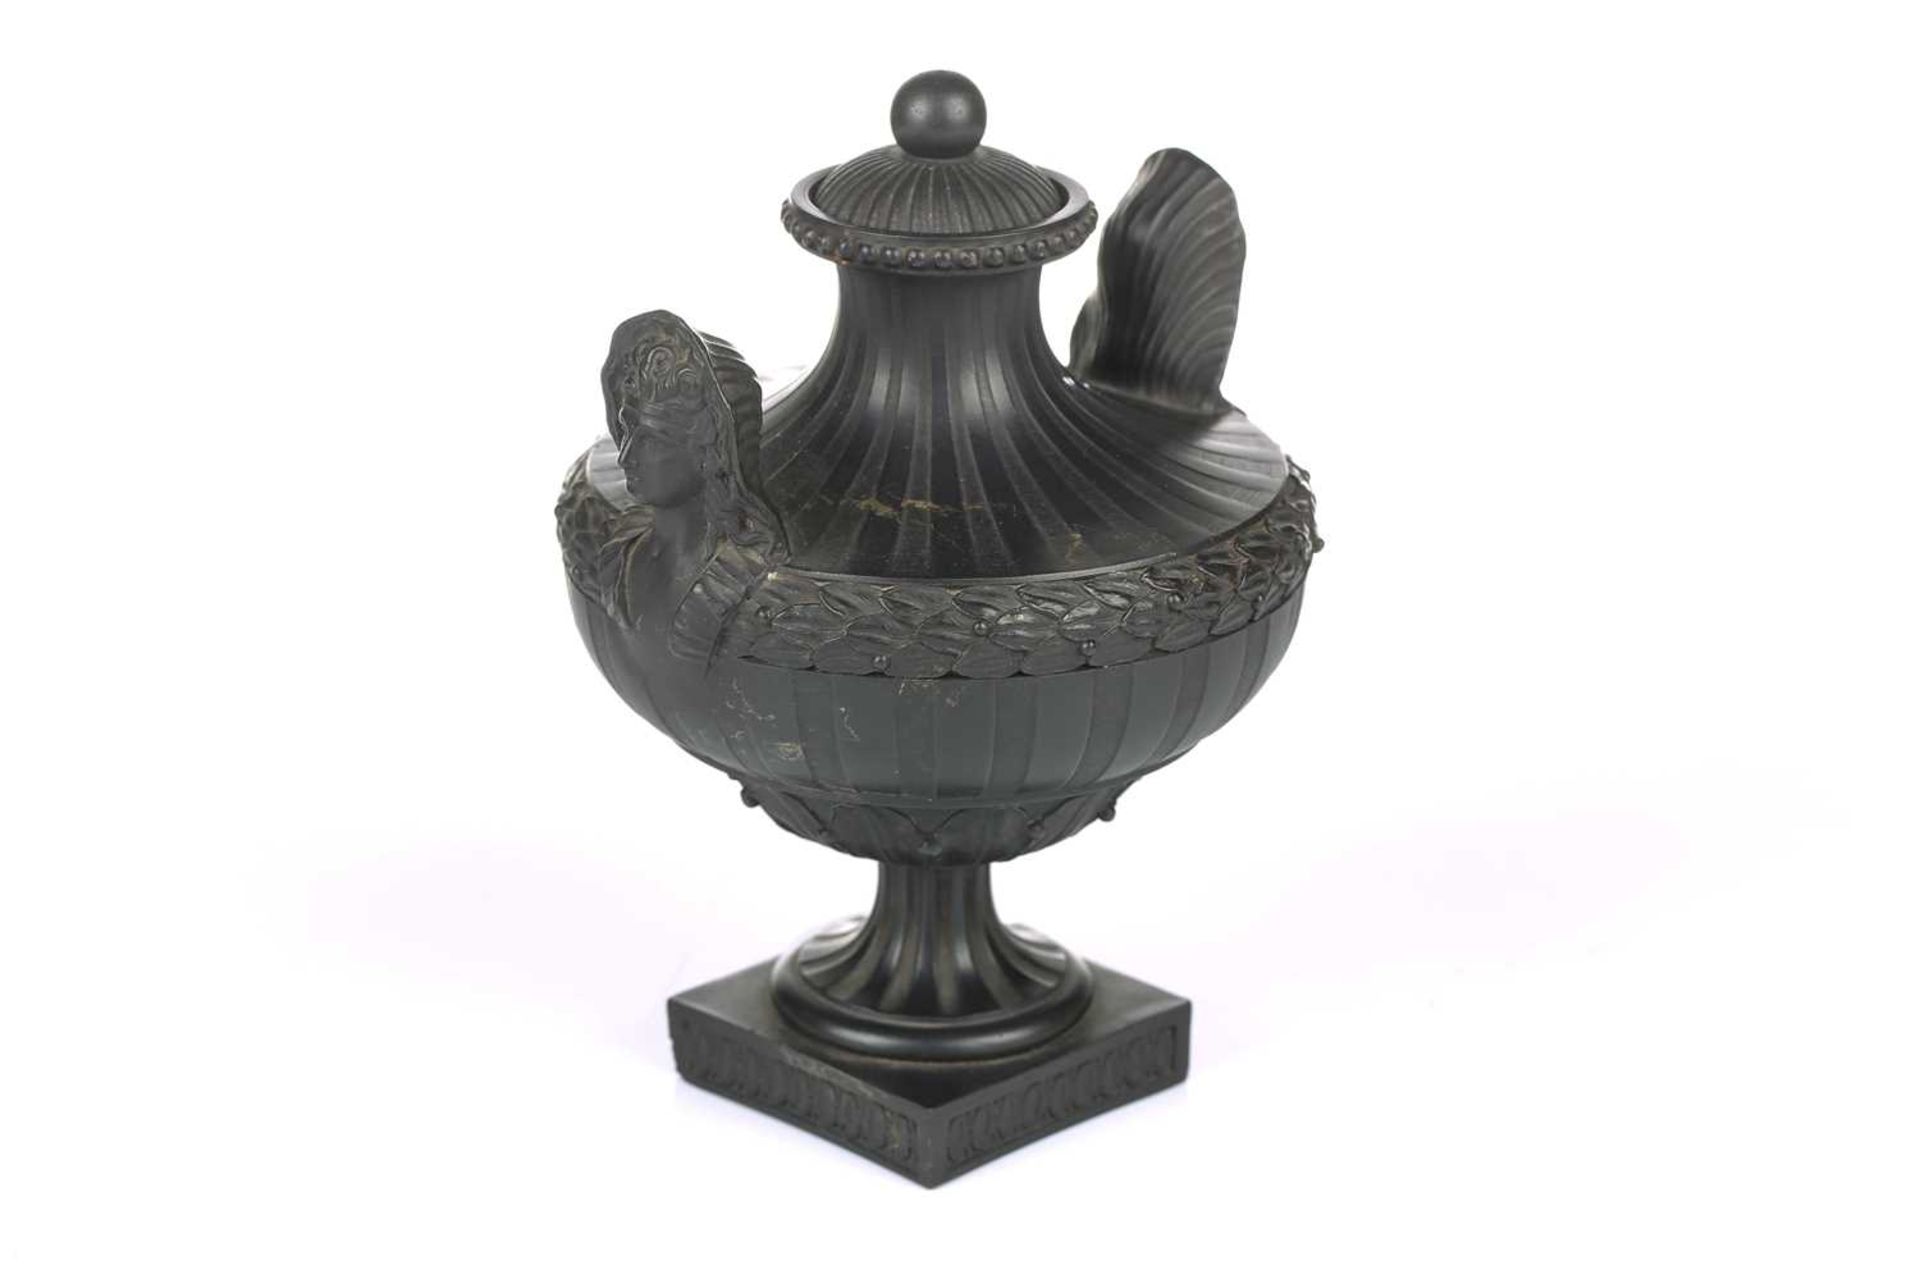 Wedgwood & Bentley, Etruria: a late 18th century black basalt urn and cover, of Classical form - Image 4 of 15